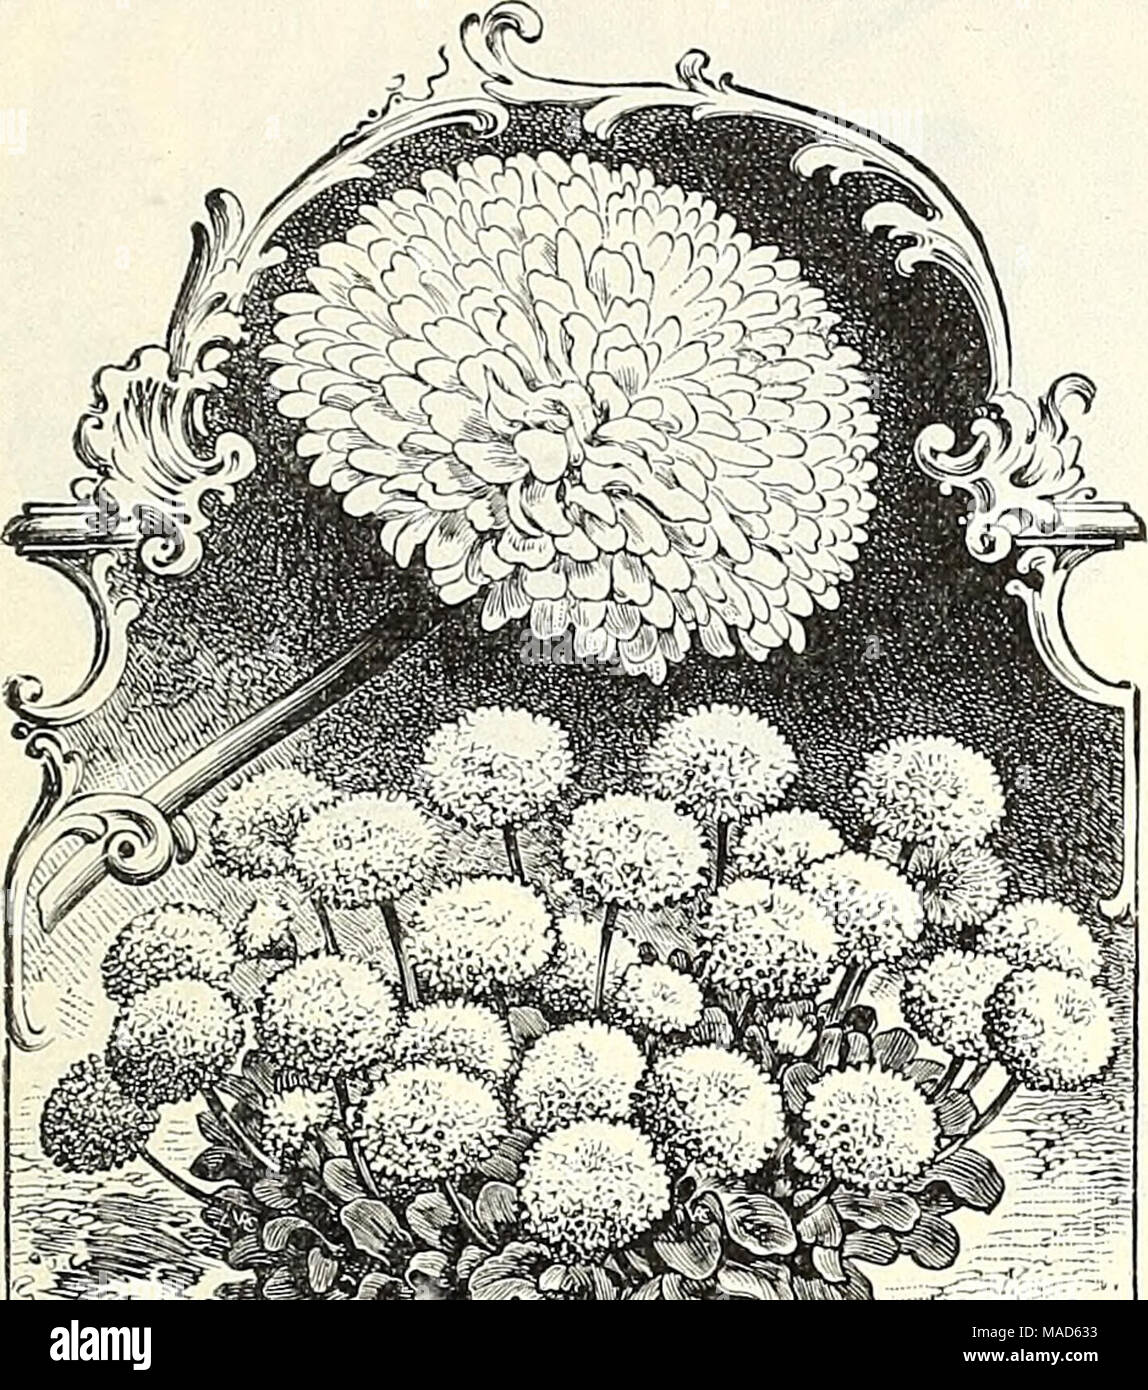 . Dreer's summer edition wholesale price list July 1899 August : seasonable flower and vegetable seeds, fertilizers, tools, etc., etc . Bellis Pkkbnnis. Double Snowball. Achillea ptarmica, double white, hardy .... Alyssum maritimum [Sweet Afyssttin) lb. $1.40 Tom Thumb, dwarf, co?npact, lb. ^2.00 . Little Gem, &quot; White Carpet,^'' very dwarf. saxatile compactum, yellow perennial . . Ampelopsis Veitchii [Boston or Japanese Izy) lb. ^1.50 Antirrhinum majus, mixed, extra fine strain . Firefly, bright red Queen of the North, white Niobe, white and crimson Nanum picturatum, striped Tom Thumb, ye Stock Photo